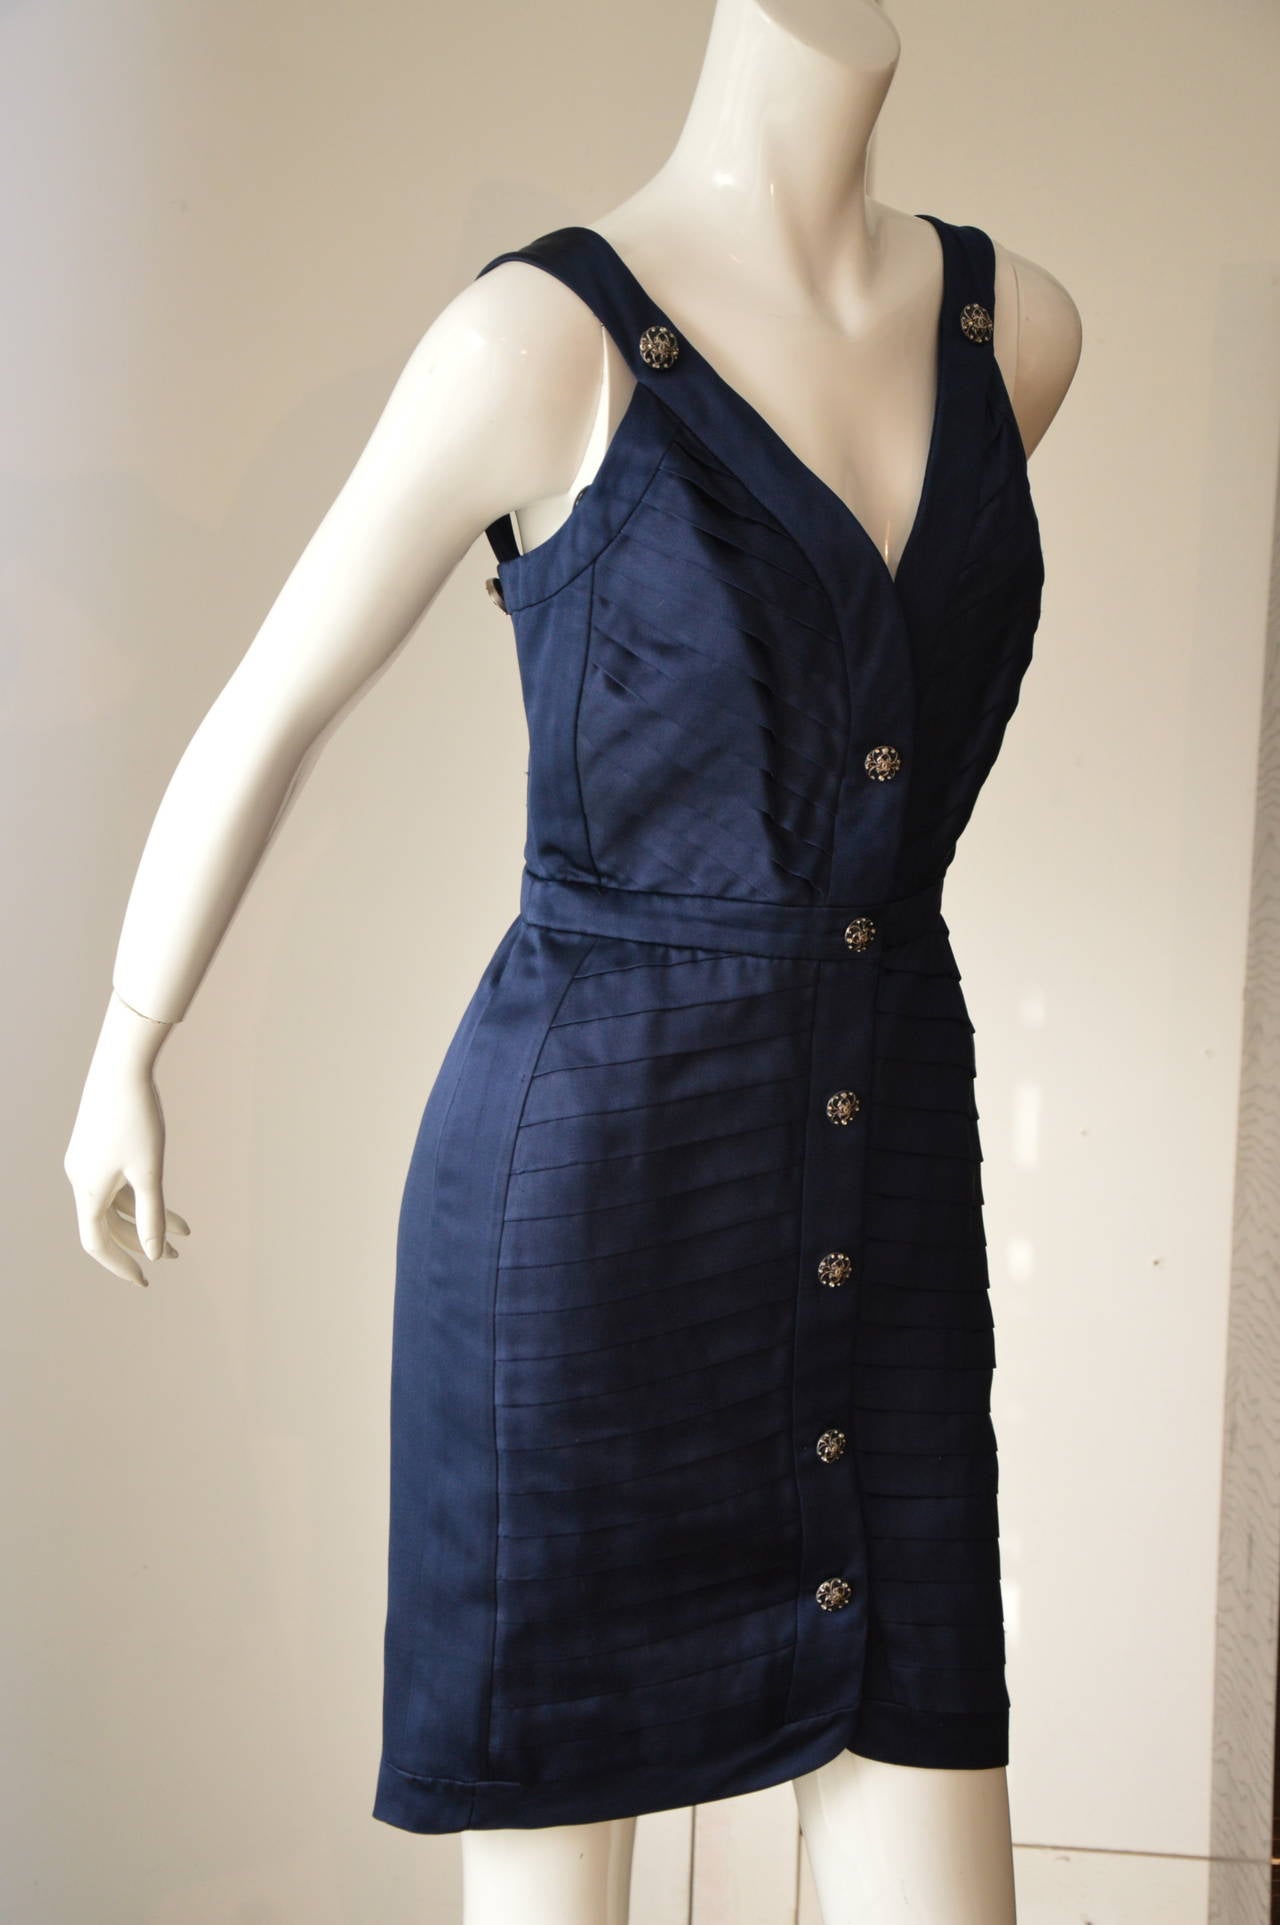 Chanel, beautiful navy blue silk satin dress, the satin gives the effect of color change in the fabric from dark blue too lighter blue, front and back patinated silver buttons, dress with pleated front effect, sides and back flat silk satin, fully